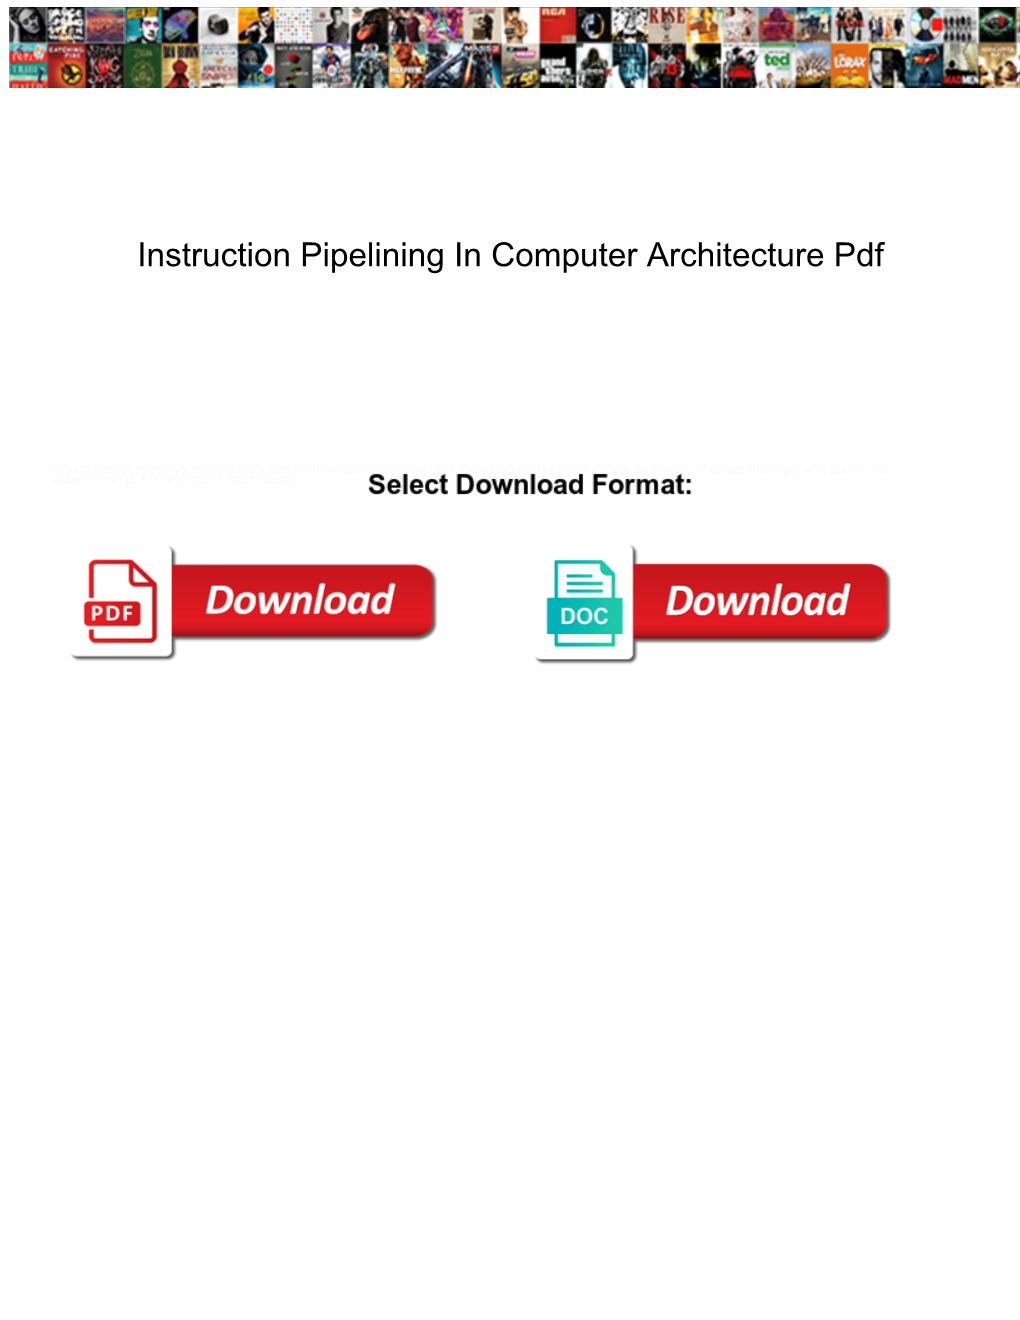 Instruction Pipelining in Computer Architecture Pdf